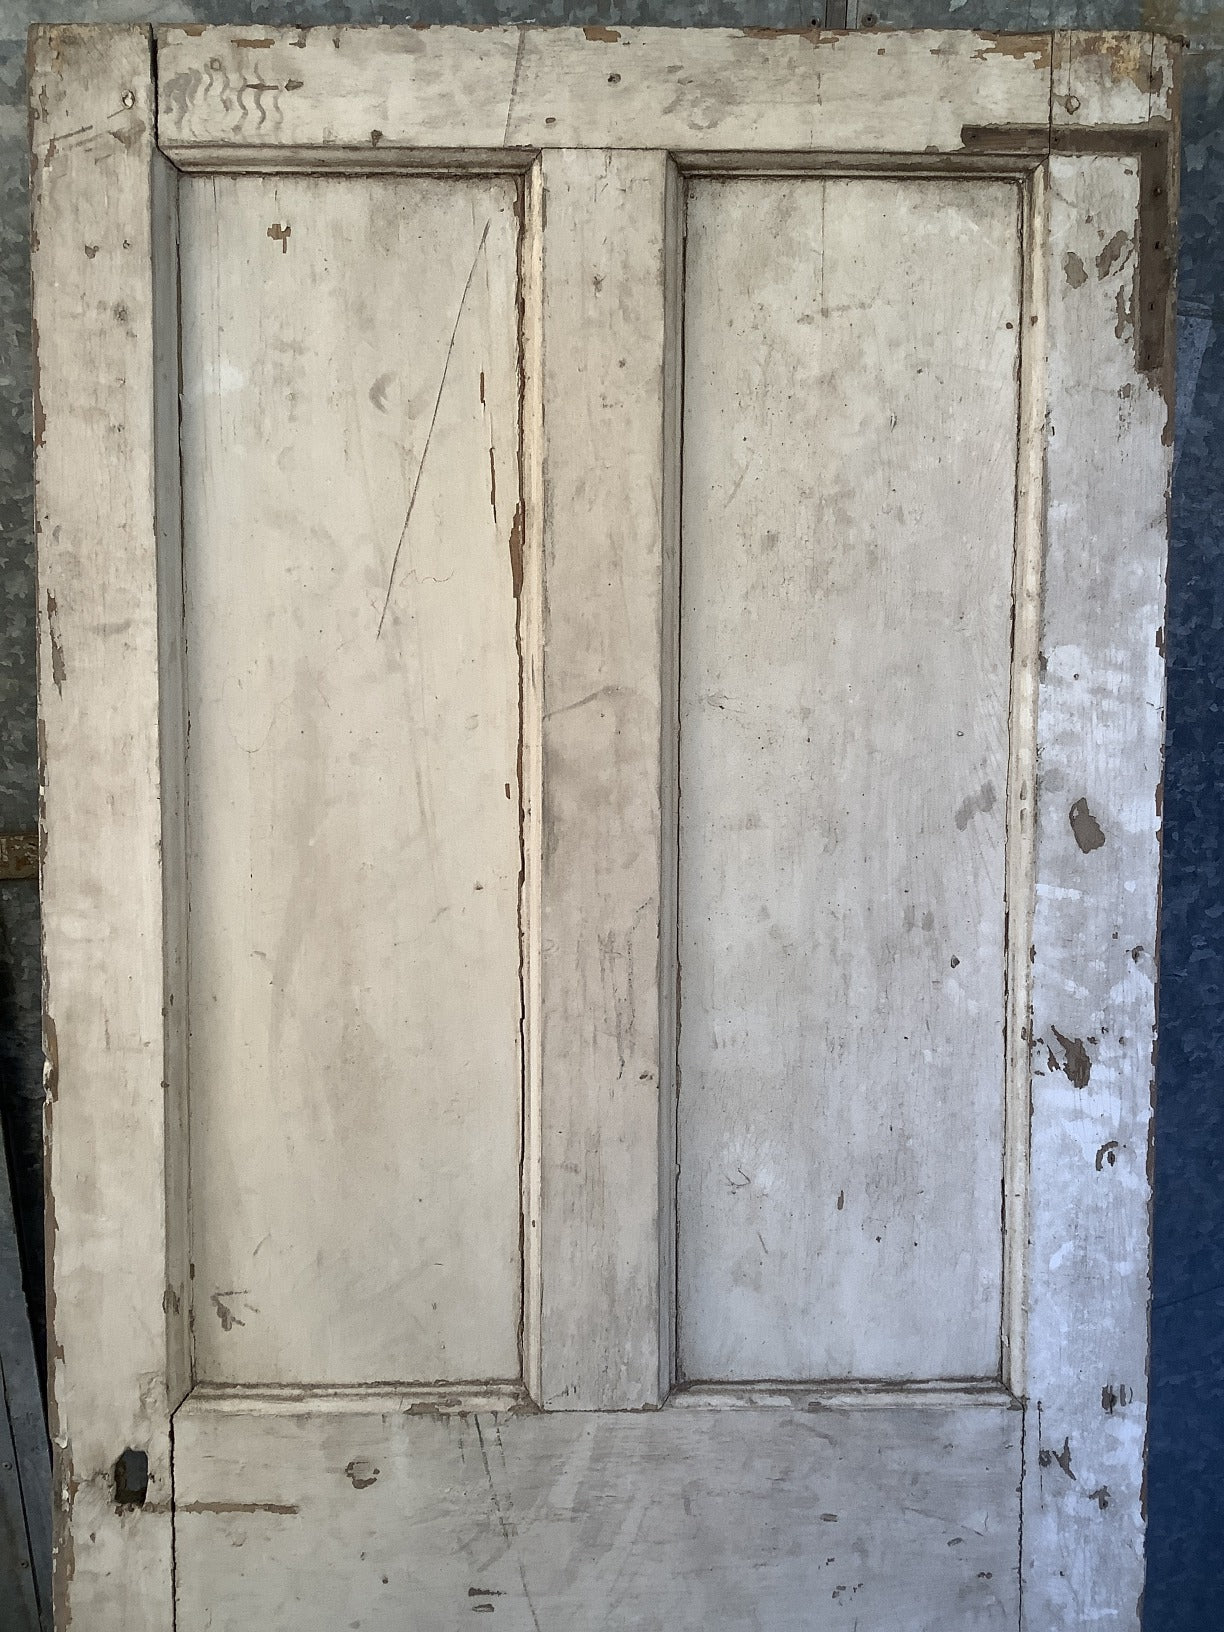 31 7/8"X76 7/8" Old Internal Painted Pine Four Panel Door 2 over 2 Reclamation